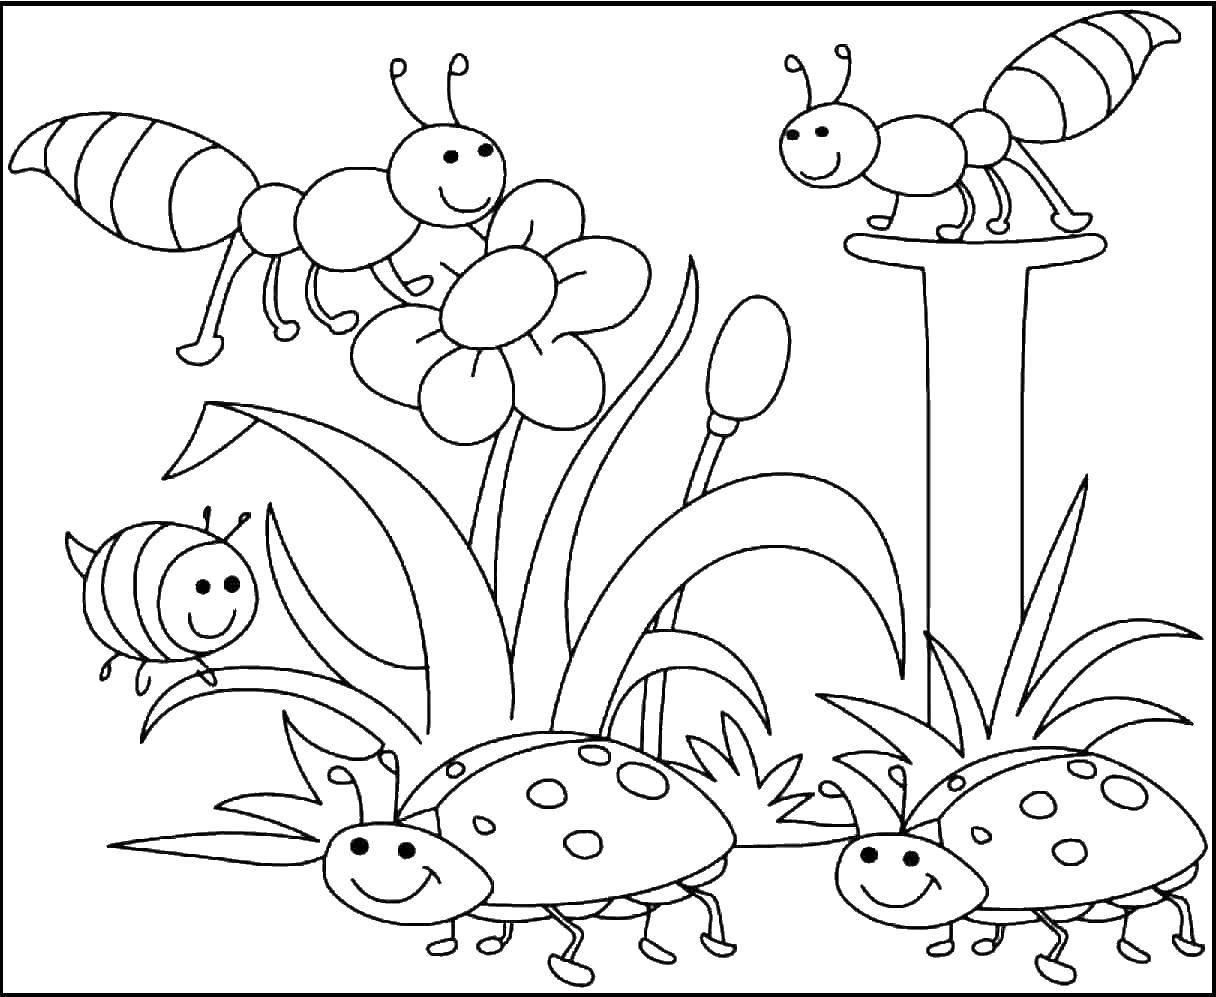 Coloring Bees and ladybugs. Category coloring. Tags:  Insects, ladybug, bee.